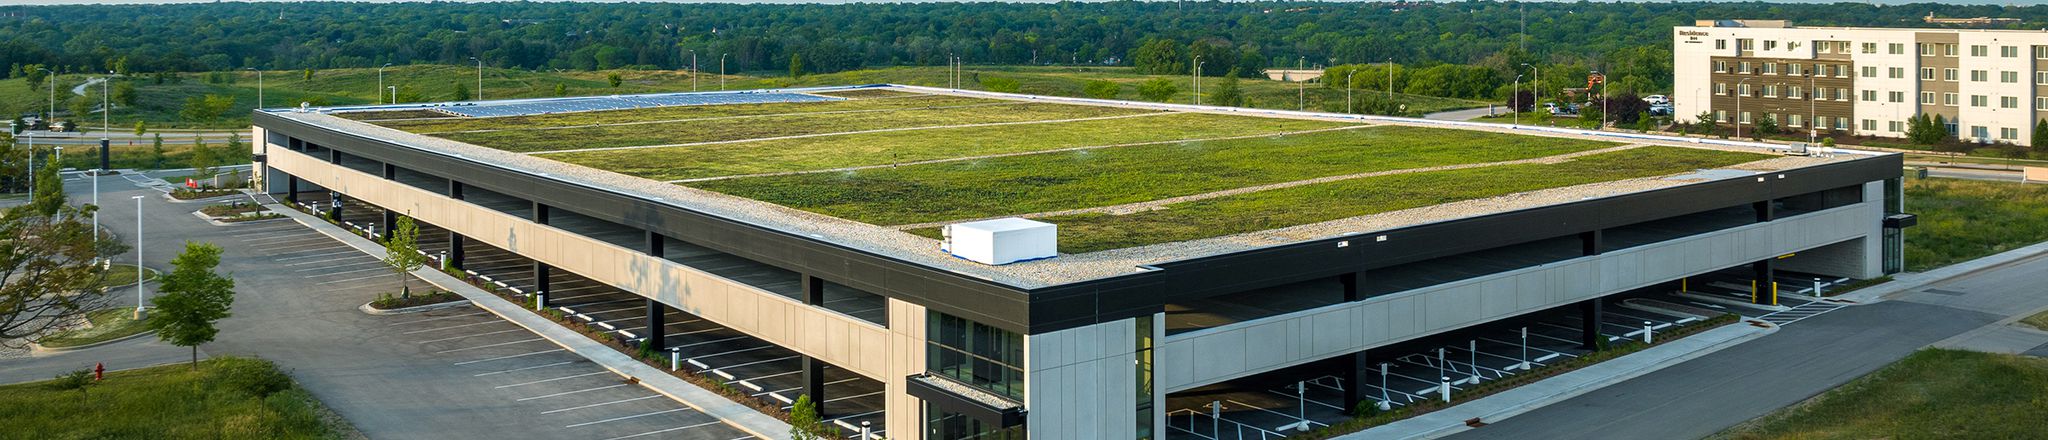 aerial view of parking deck at innovation park with grass on roof